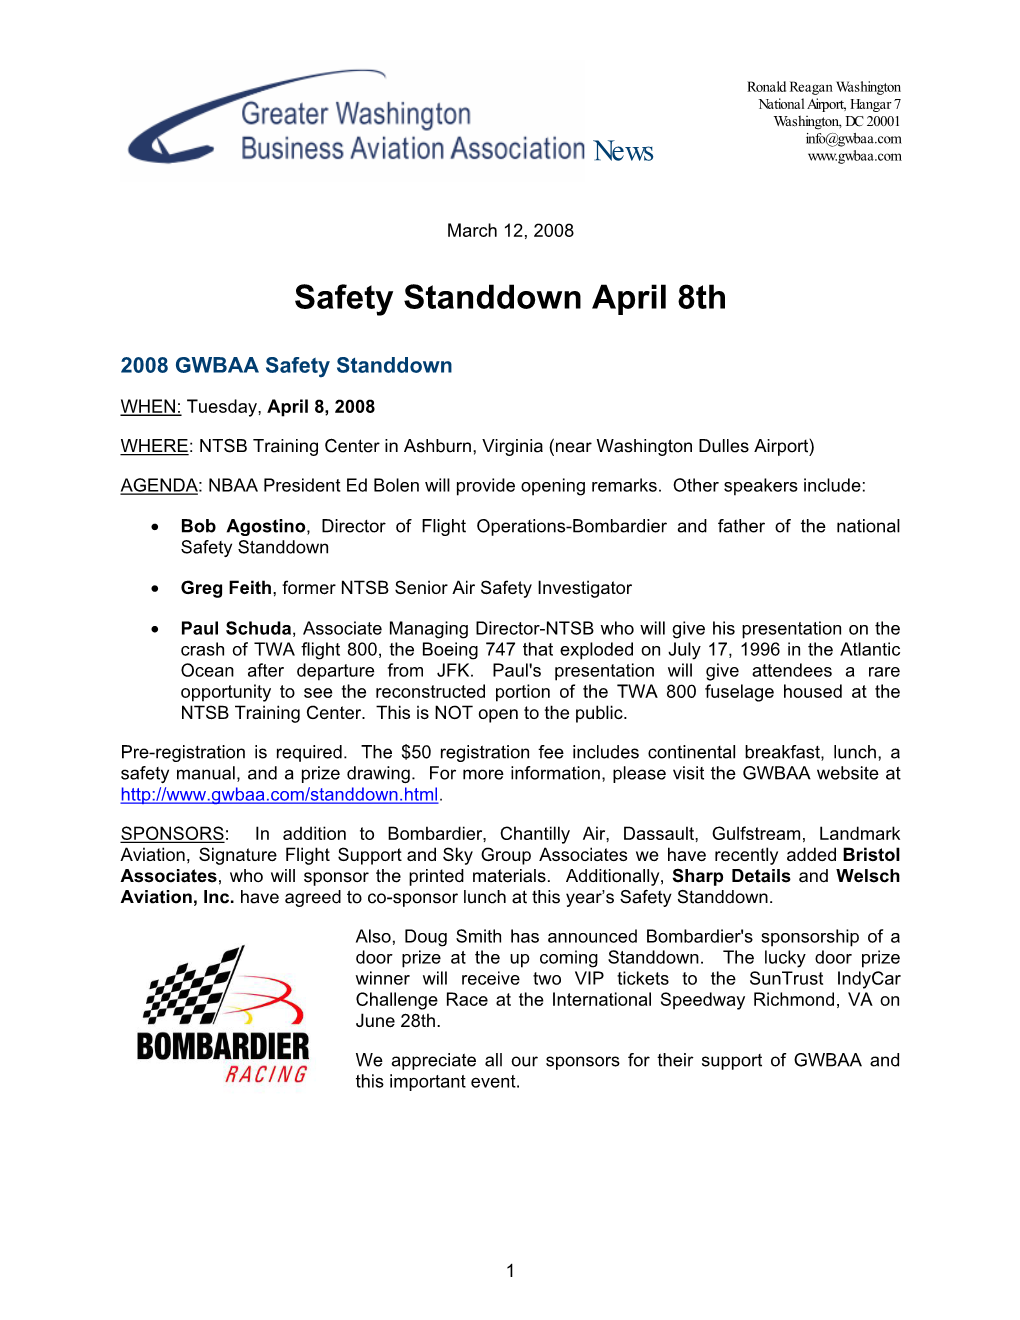 Safety Standdown April 8Th